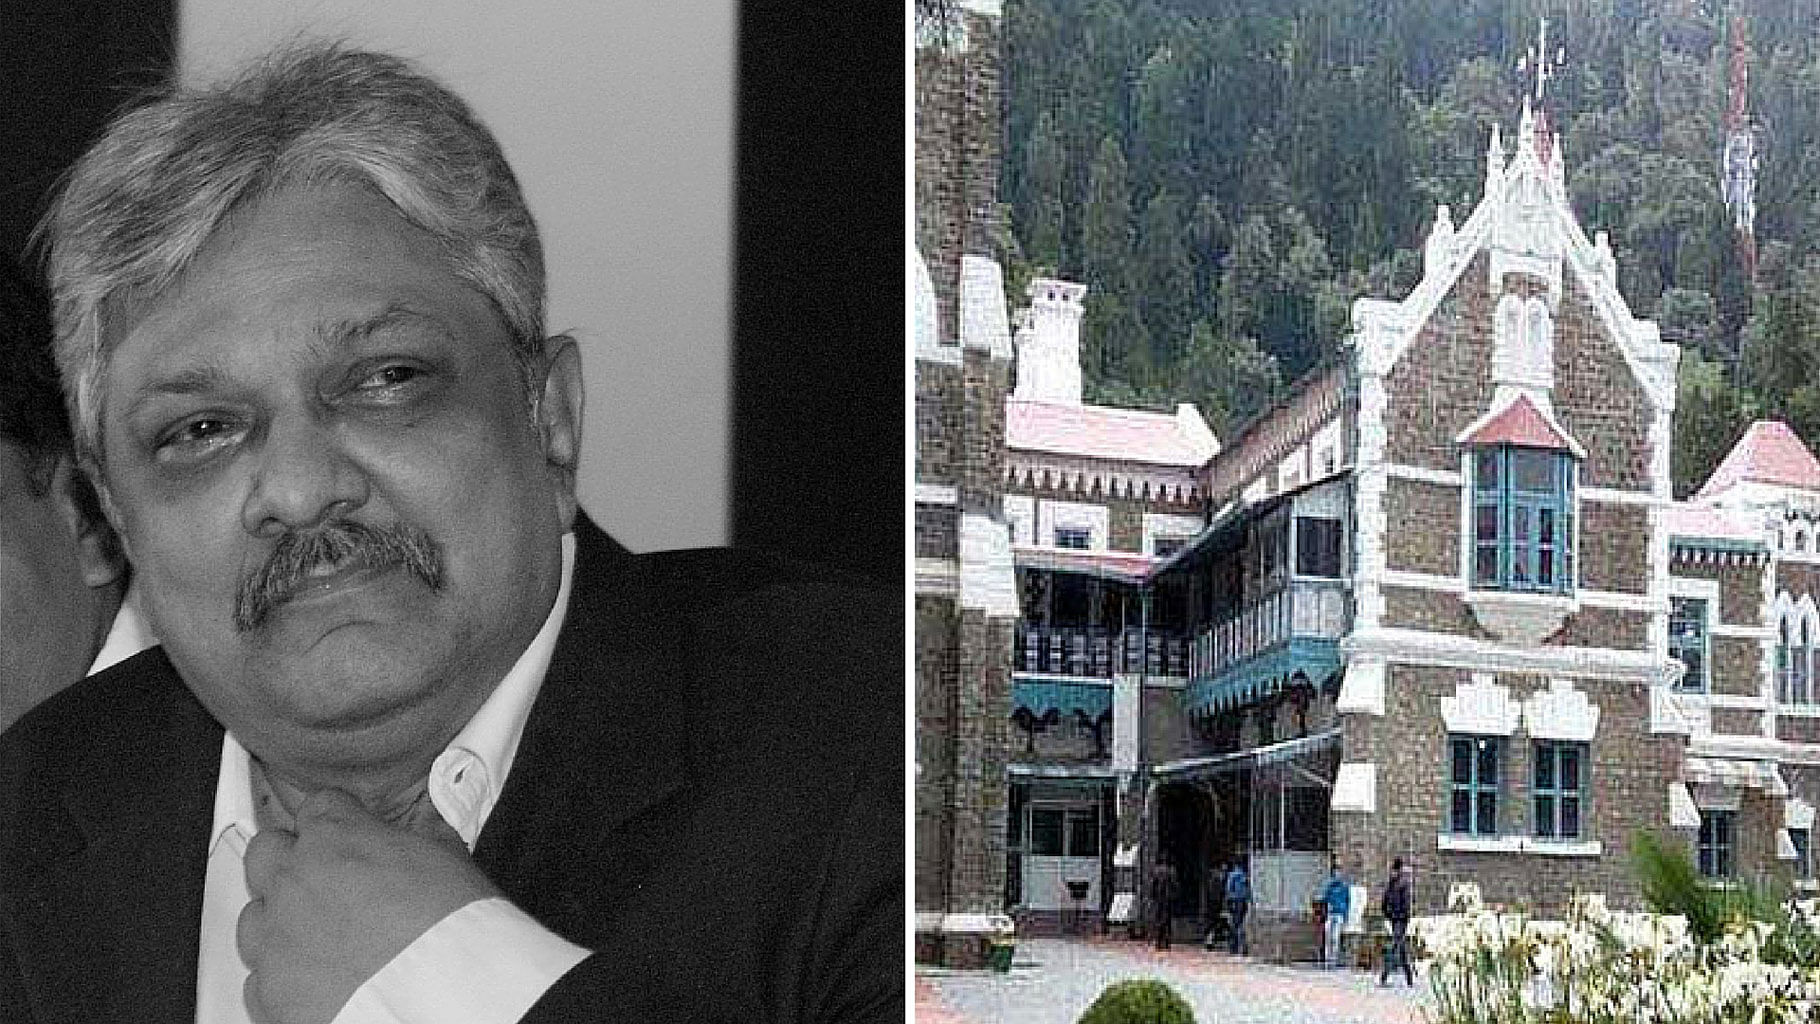 Chief Justice KM Joseph of the Uttarakhand High Court has been transferred to the Andhra Pradesh High Court. (Photo: <b>The Quint</b>)